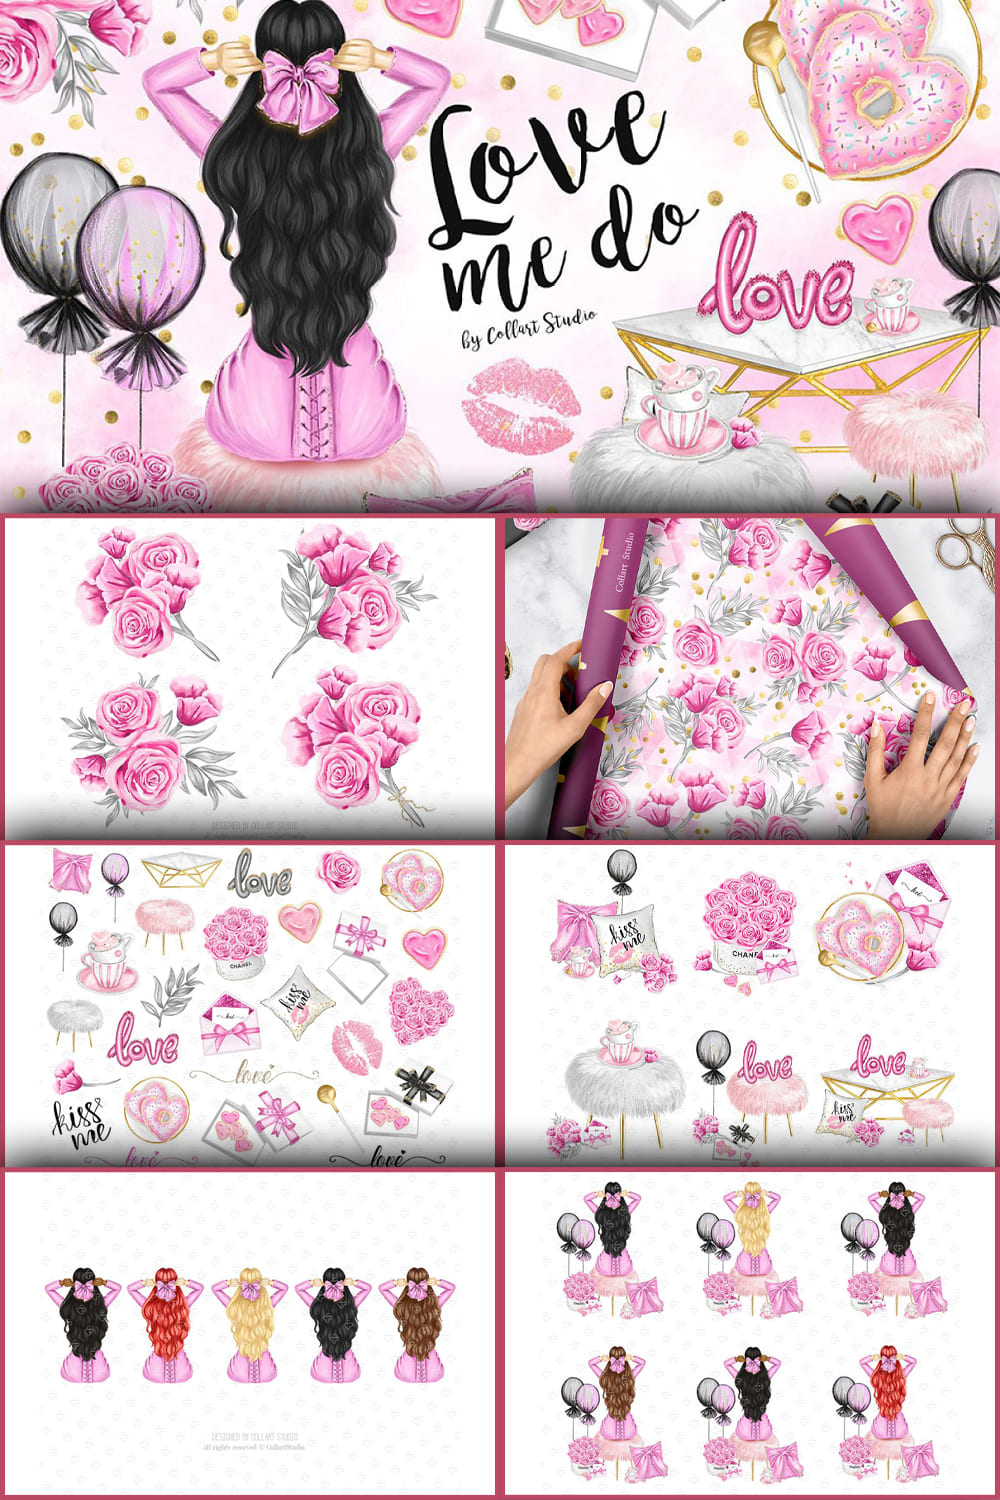 Slides with pink flowers, dresses and gifts - everything that Valentine's Day is famous for.